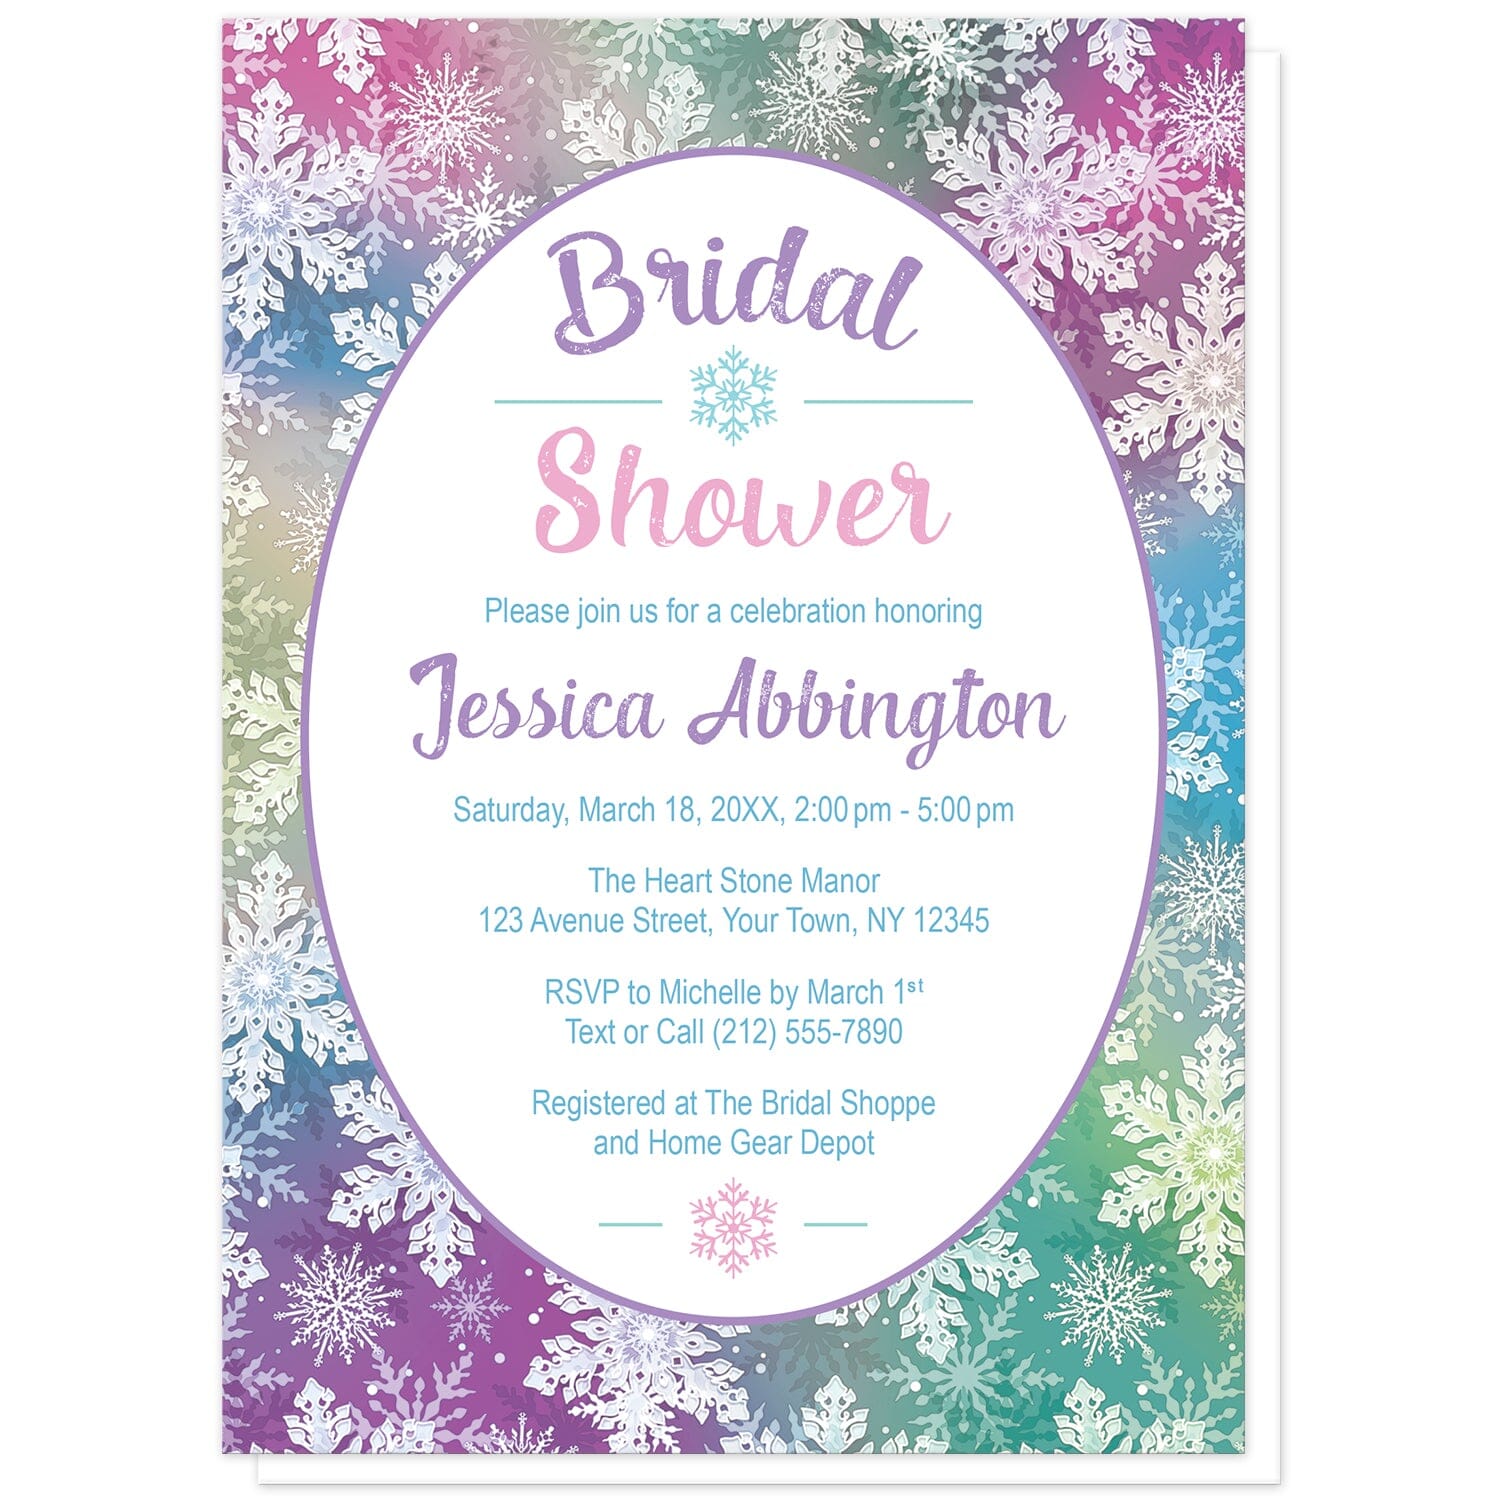 Rainbow Snowflake Bridal Shower Invitations at Artistically Invited. Rainbow snowflake bridal shower invitations designed with your personalized bridal shower details custom printed in colorful text in a white oval frame design over a beautiful and ornate rainbow snowflake pattern with white snowflakes over a multicolored background.